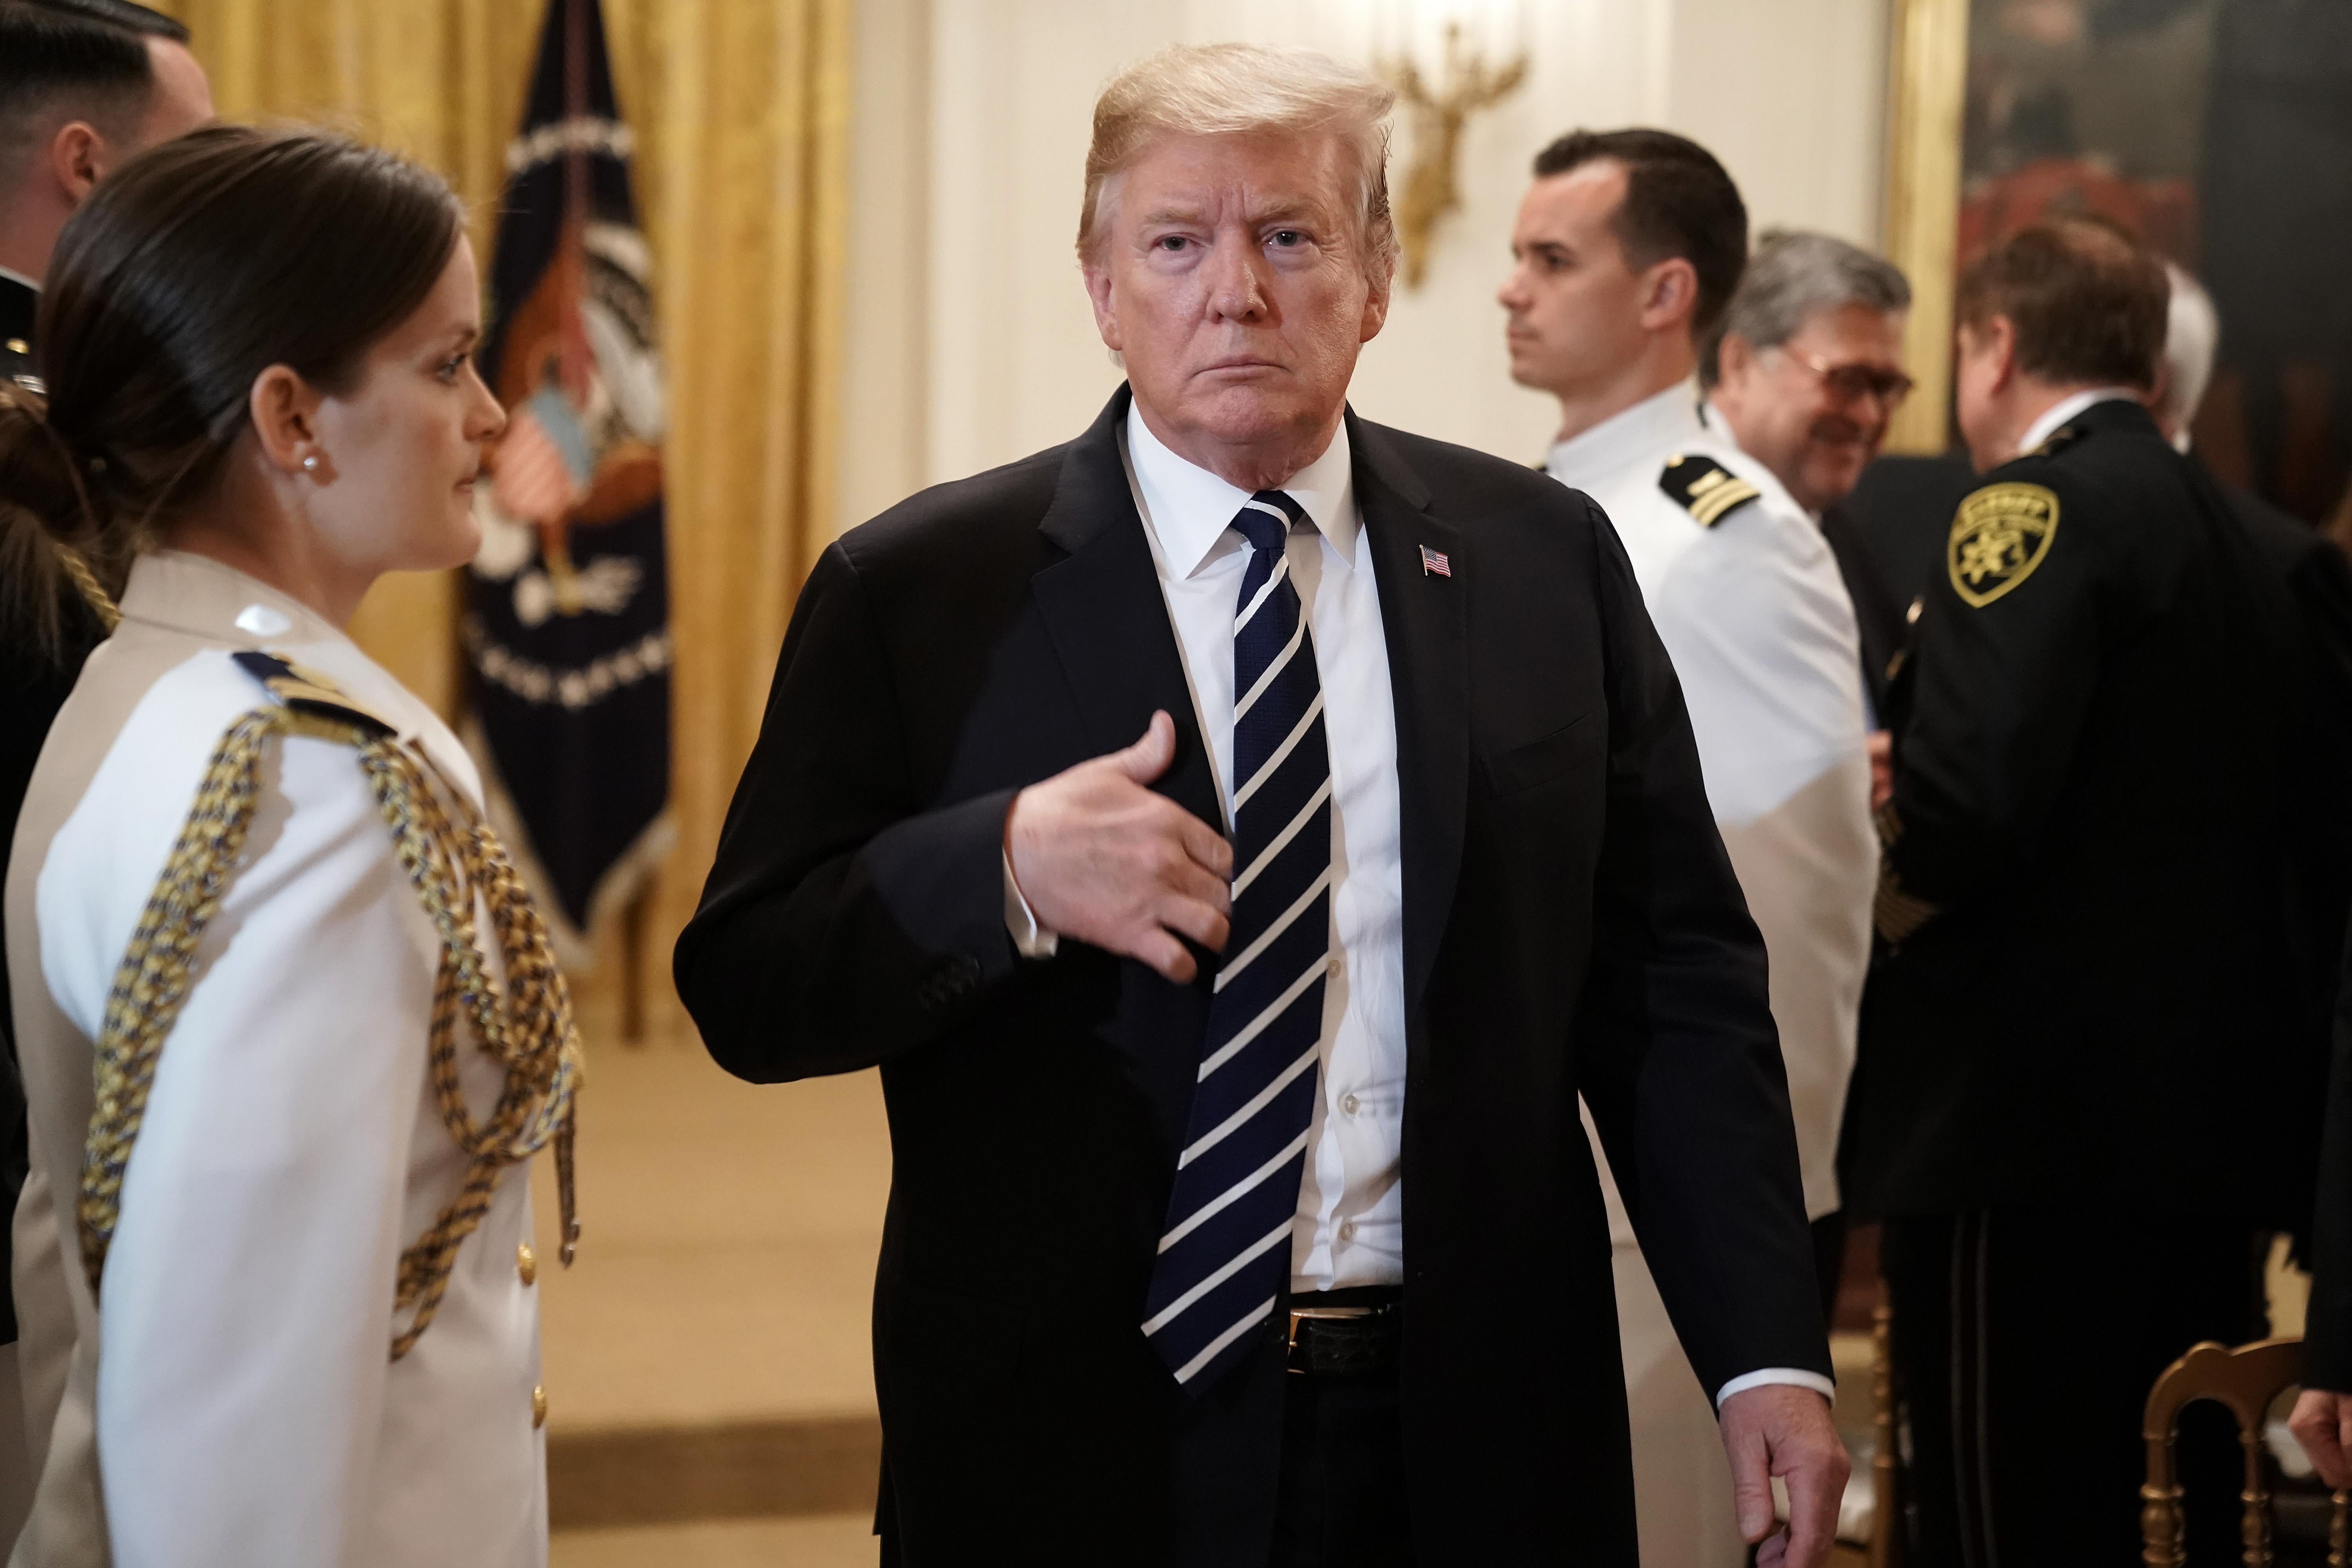 President Donald Trump walks off the podium after presenting the Public Safety Officer Medal of Valor at the White House on May 22, 2019 in Washington, D.C. 